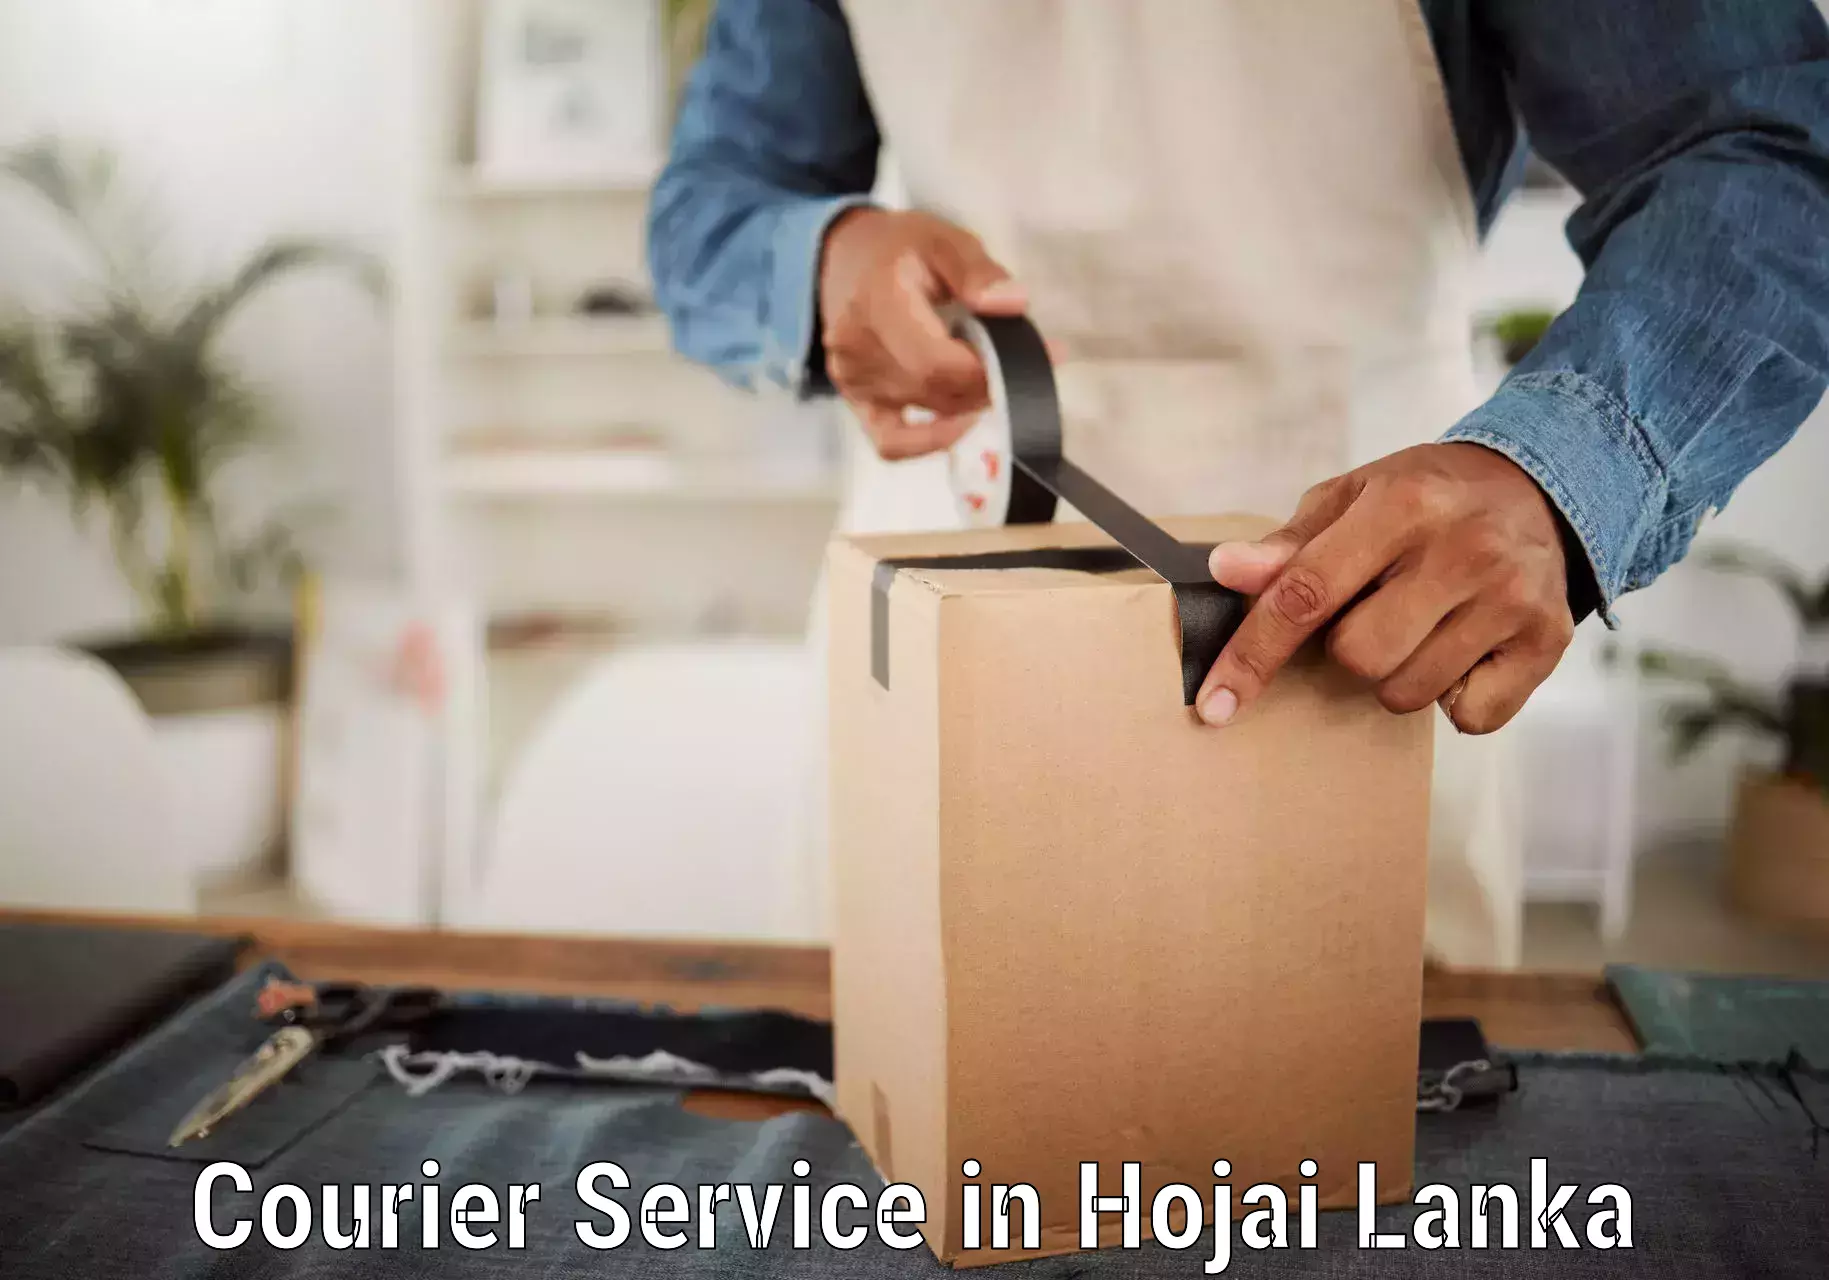 Courier service booking in Hojai Lanka